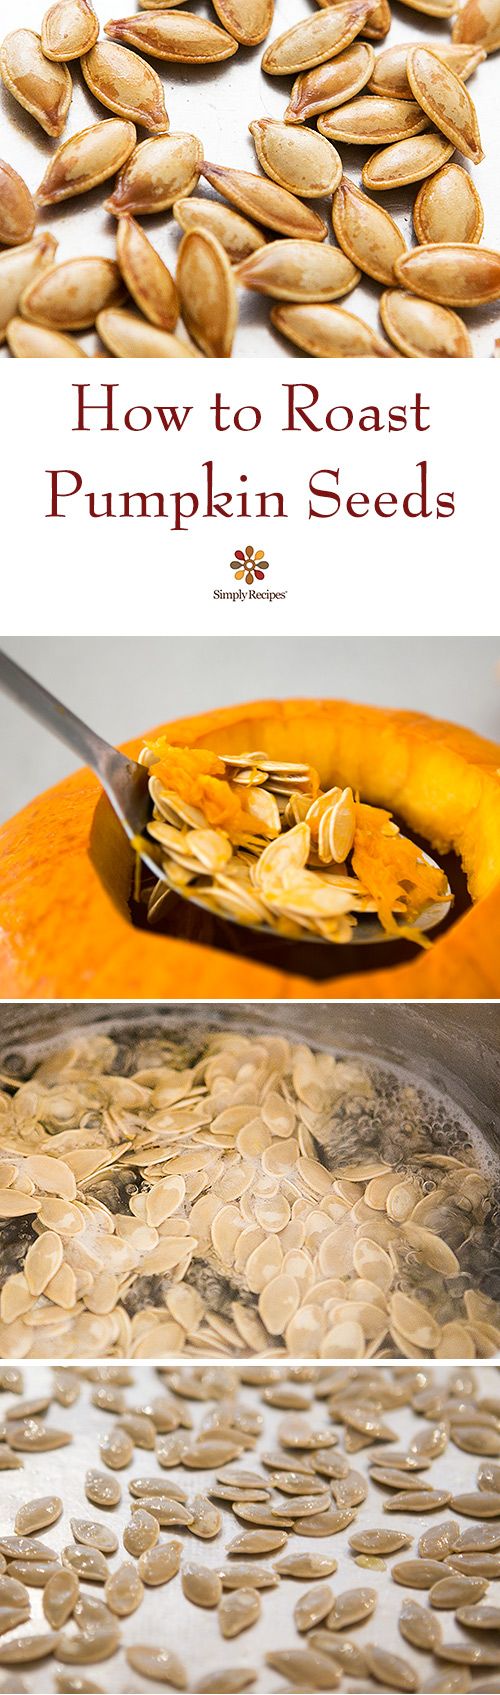 This is the best way to roast pumpkin seeds, so the salt penetrates all the way to the inside seed. Roasted pumpkin seeds are the perfect fall snack. Easy, crunchy, and irresistible!